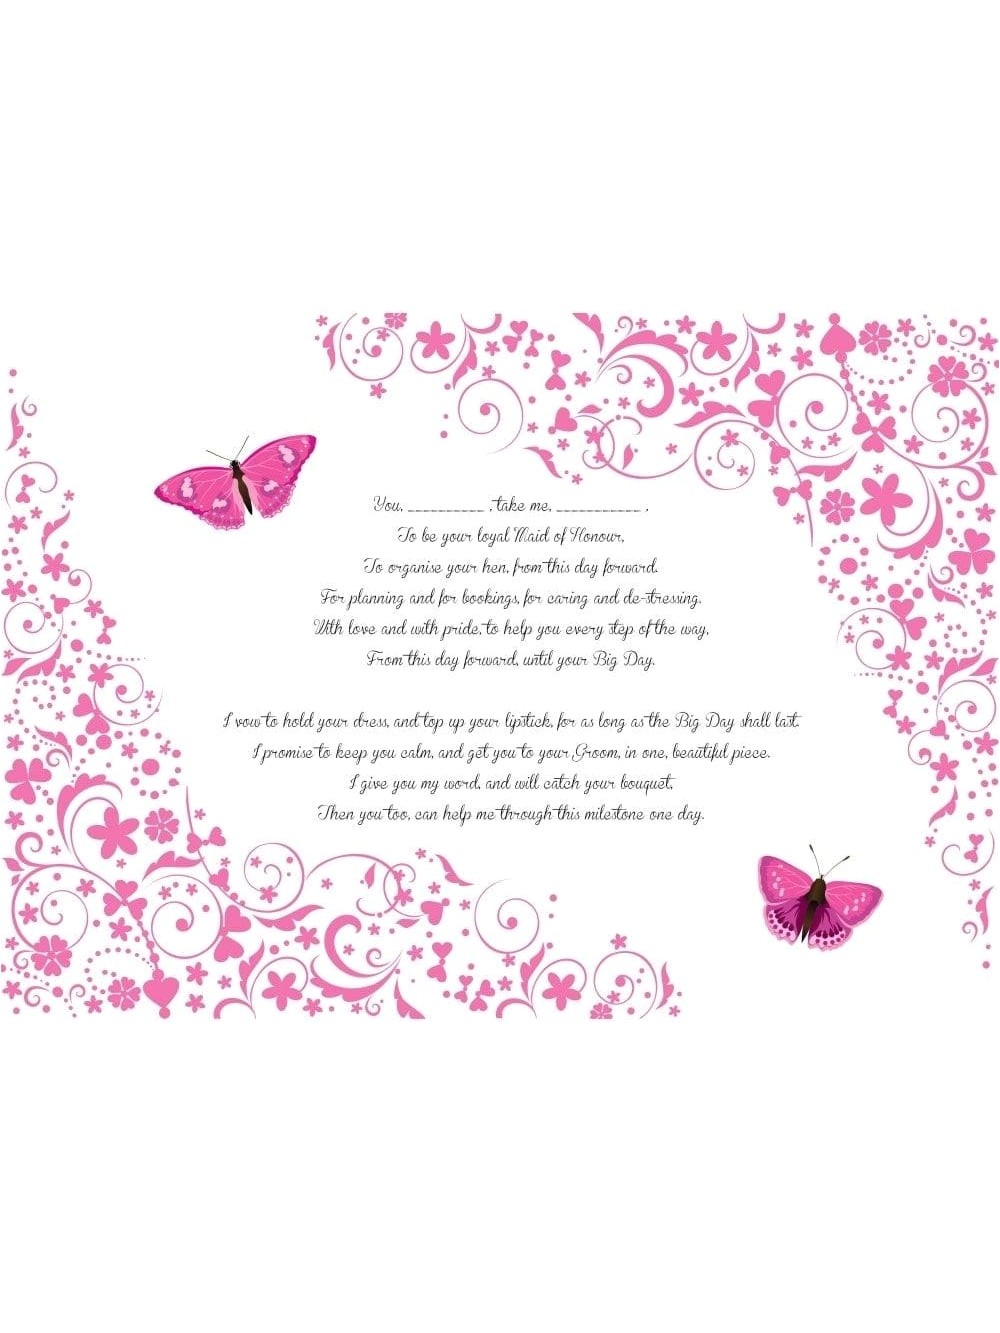 Hen Party Poems for Invites Hen Party Poems for Invites Invitation Librarry